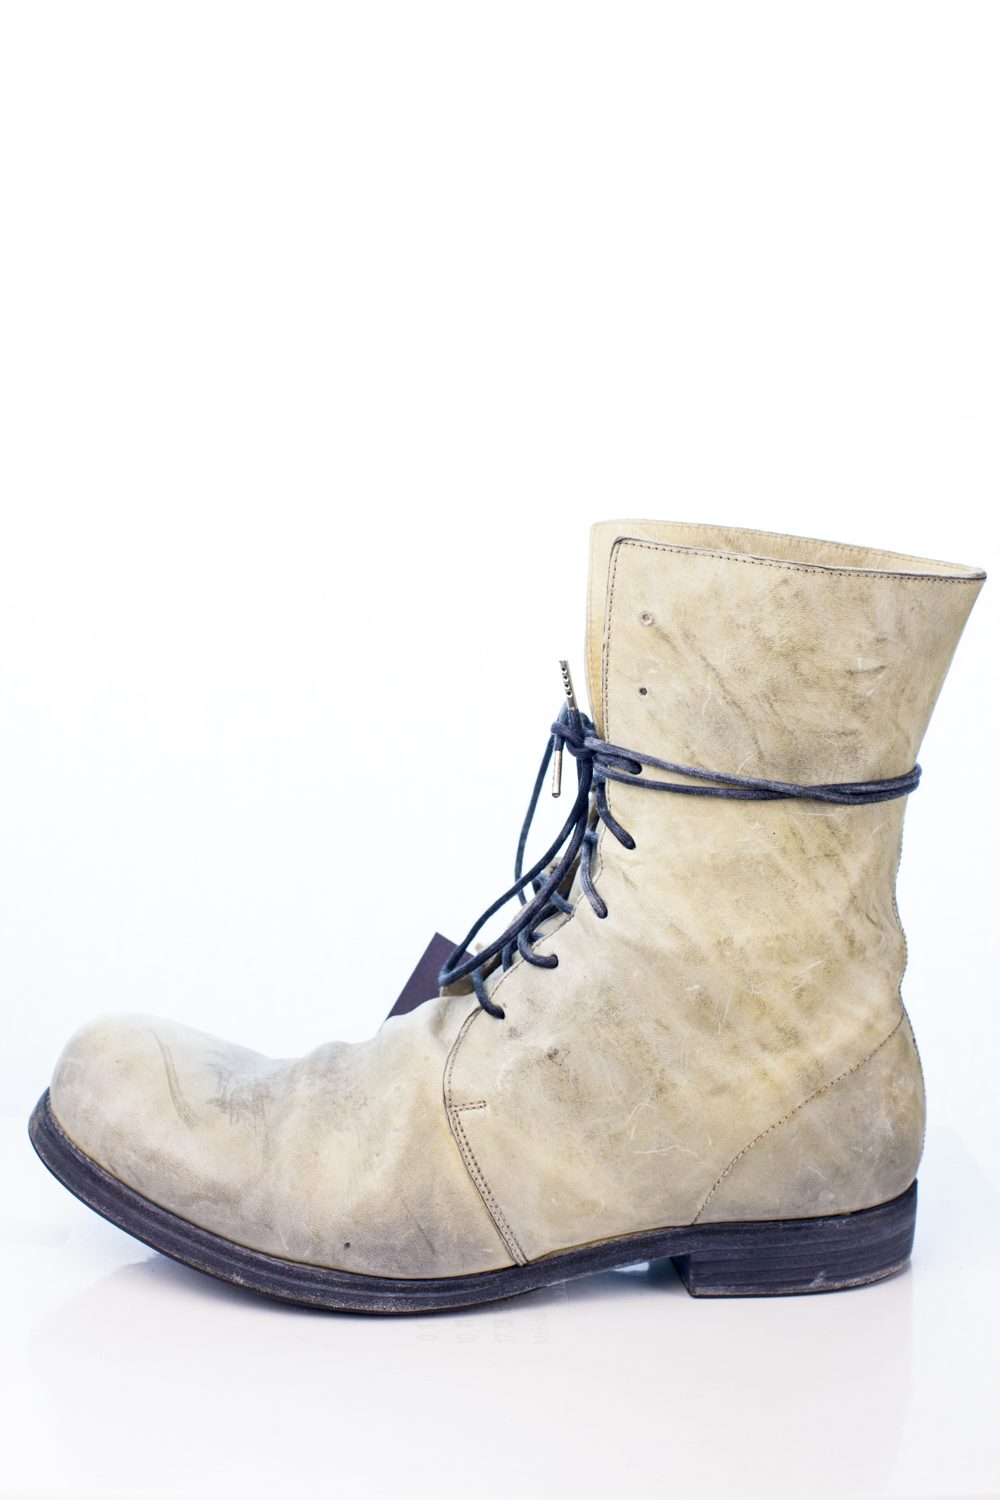 A1923 Horse Leather 7-hole boot